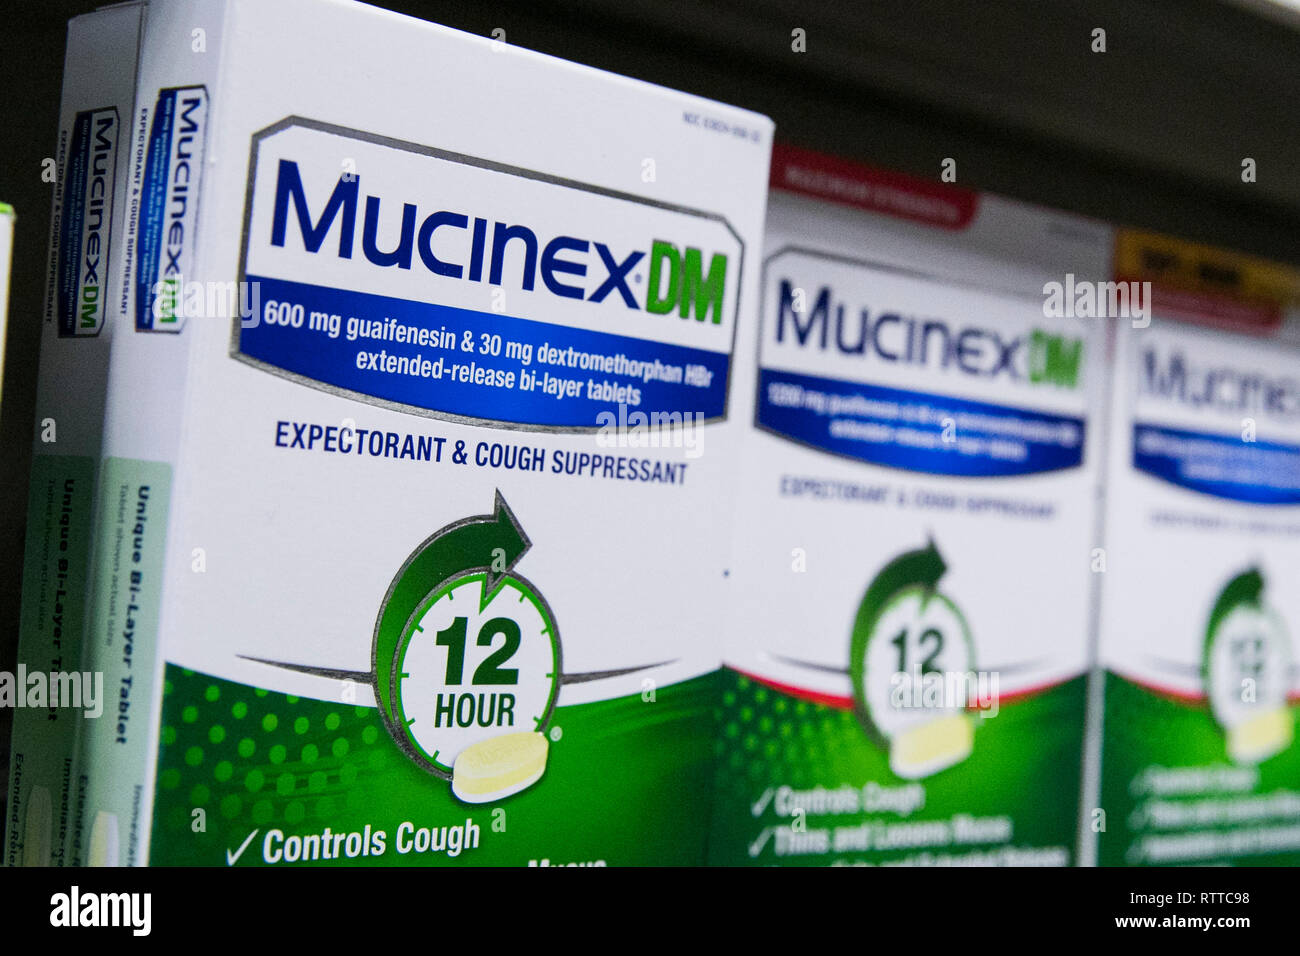 Mucinex DM over-the-counter cold medicine photographed in a pharmacy. Stock Photo